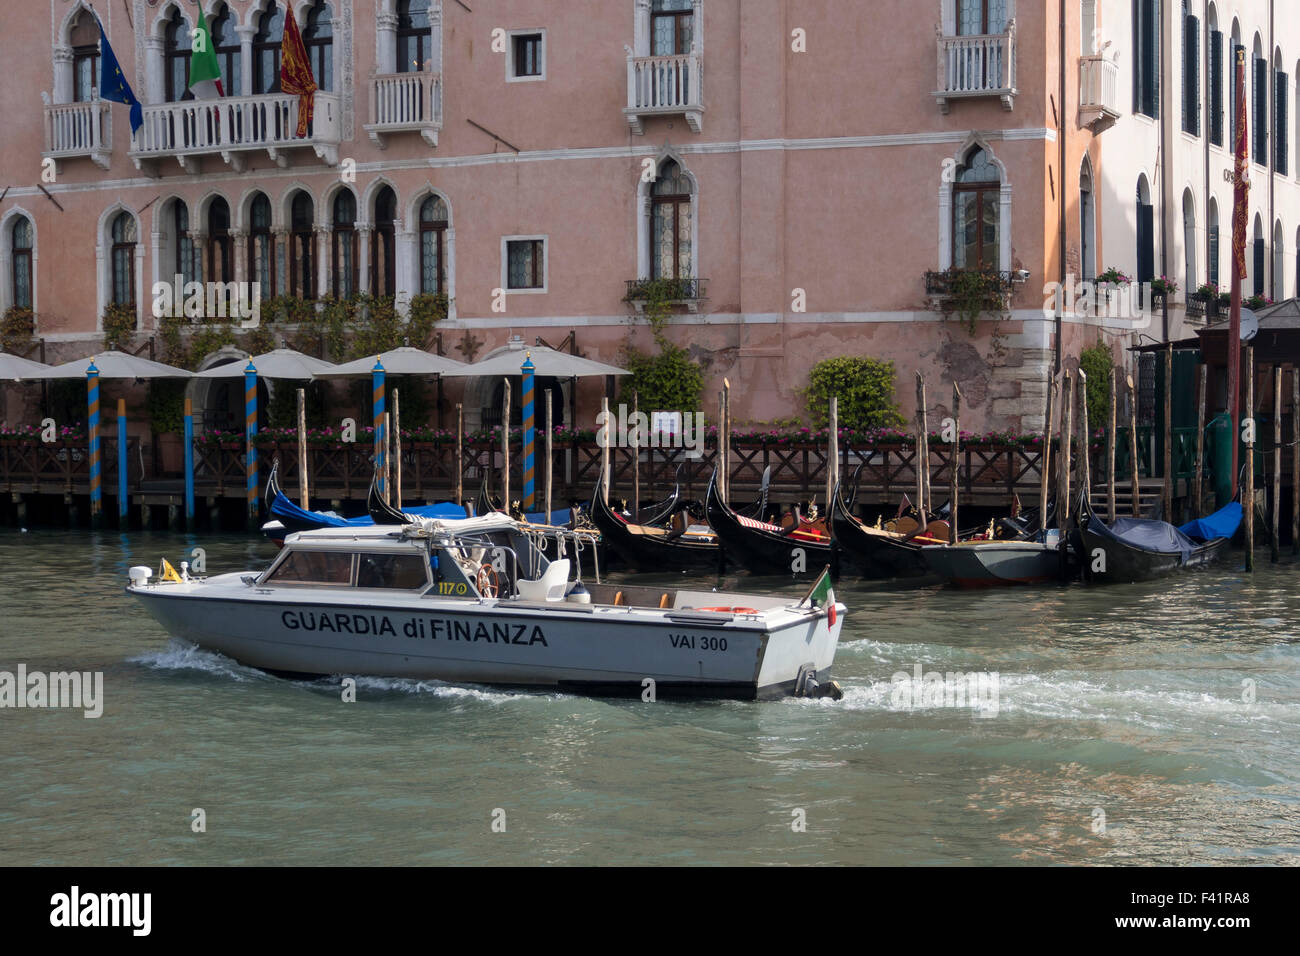 VENICE, ITALY - MAY 06, 2015:  Boat of the Guardia di Finanza on the Grand Canal Stock Photo